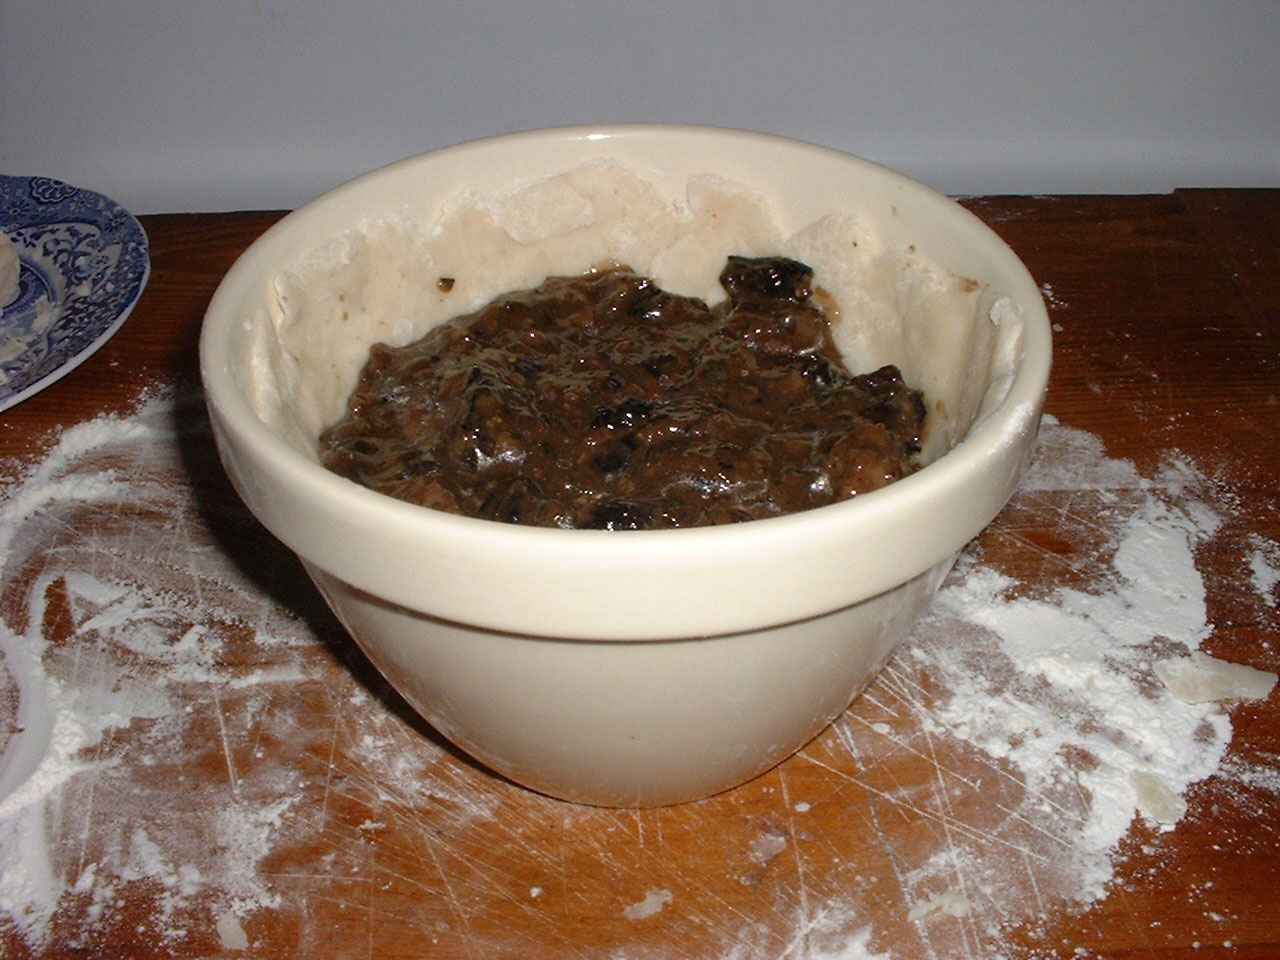 Putting filling into steamed pudding